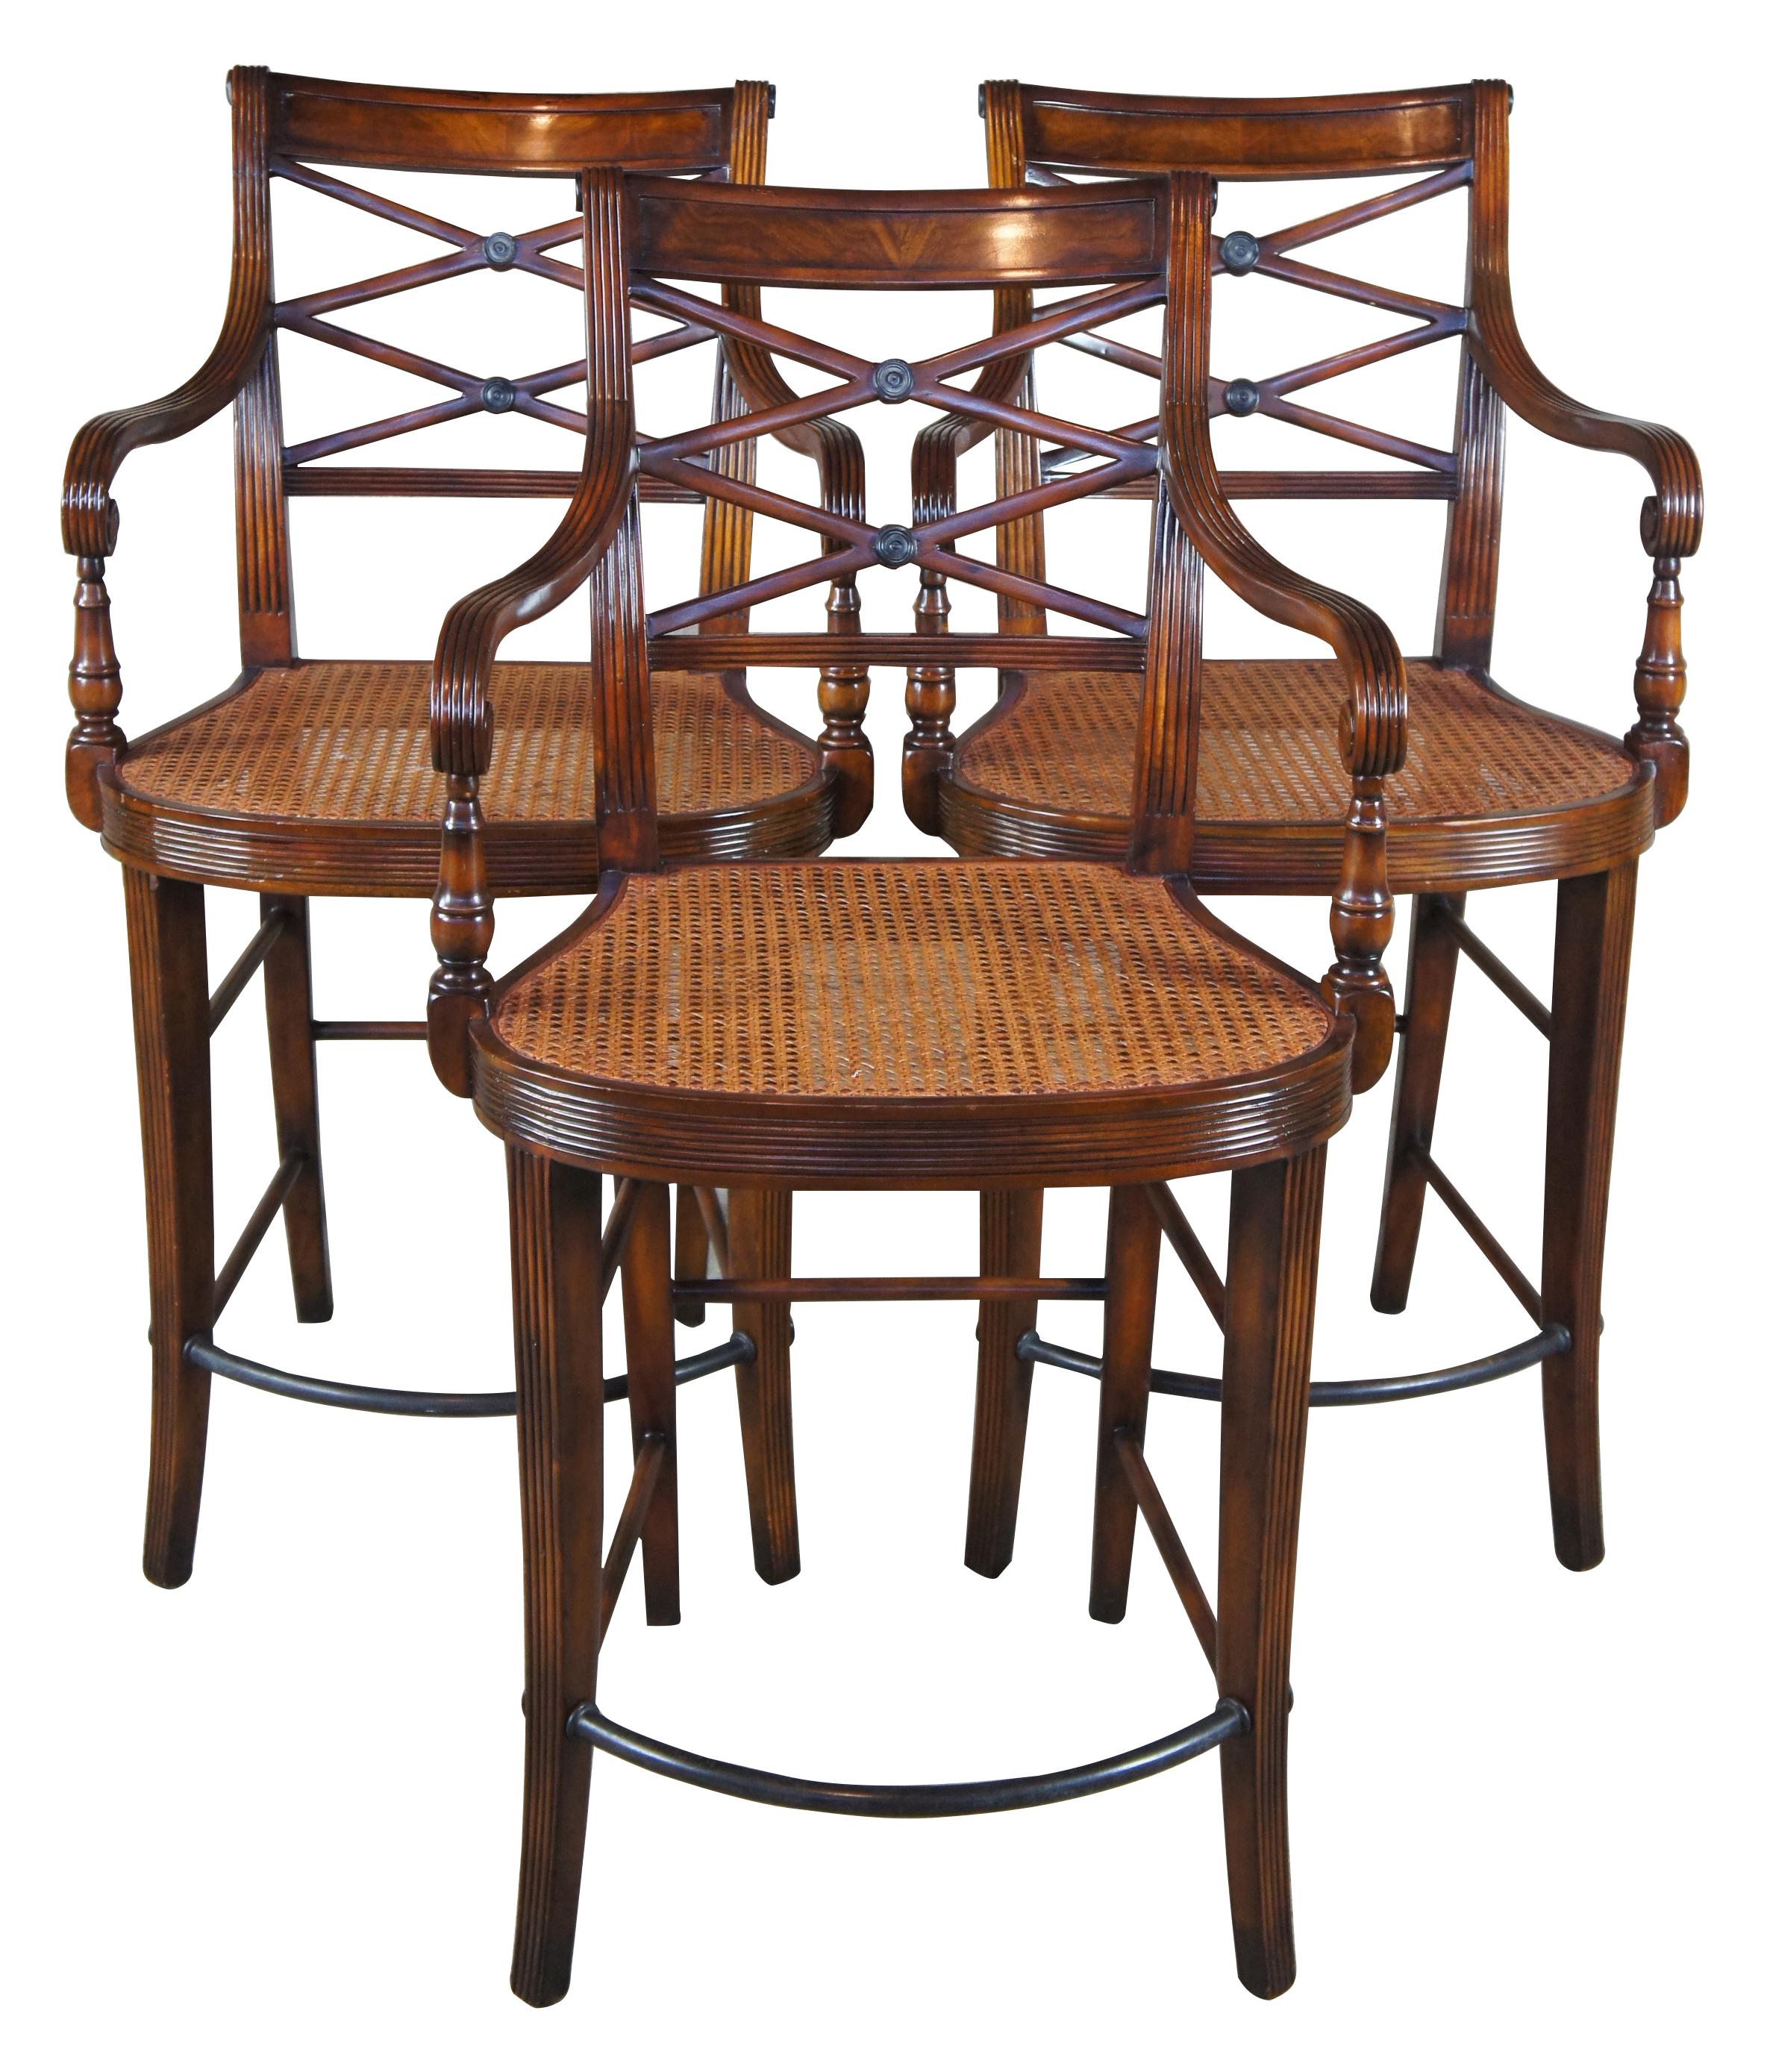 Theodore Alexander counter height bar stools # 4100. Features a hand carved armchair with reeded decoration, over scroll and double 'X' pierced back above a cane seat with upholstered down filled cushion. The chairs are made from mahogany and